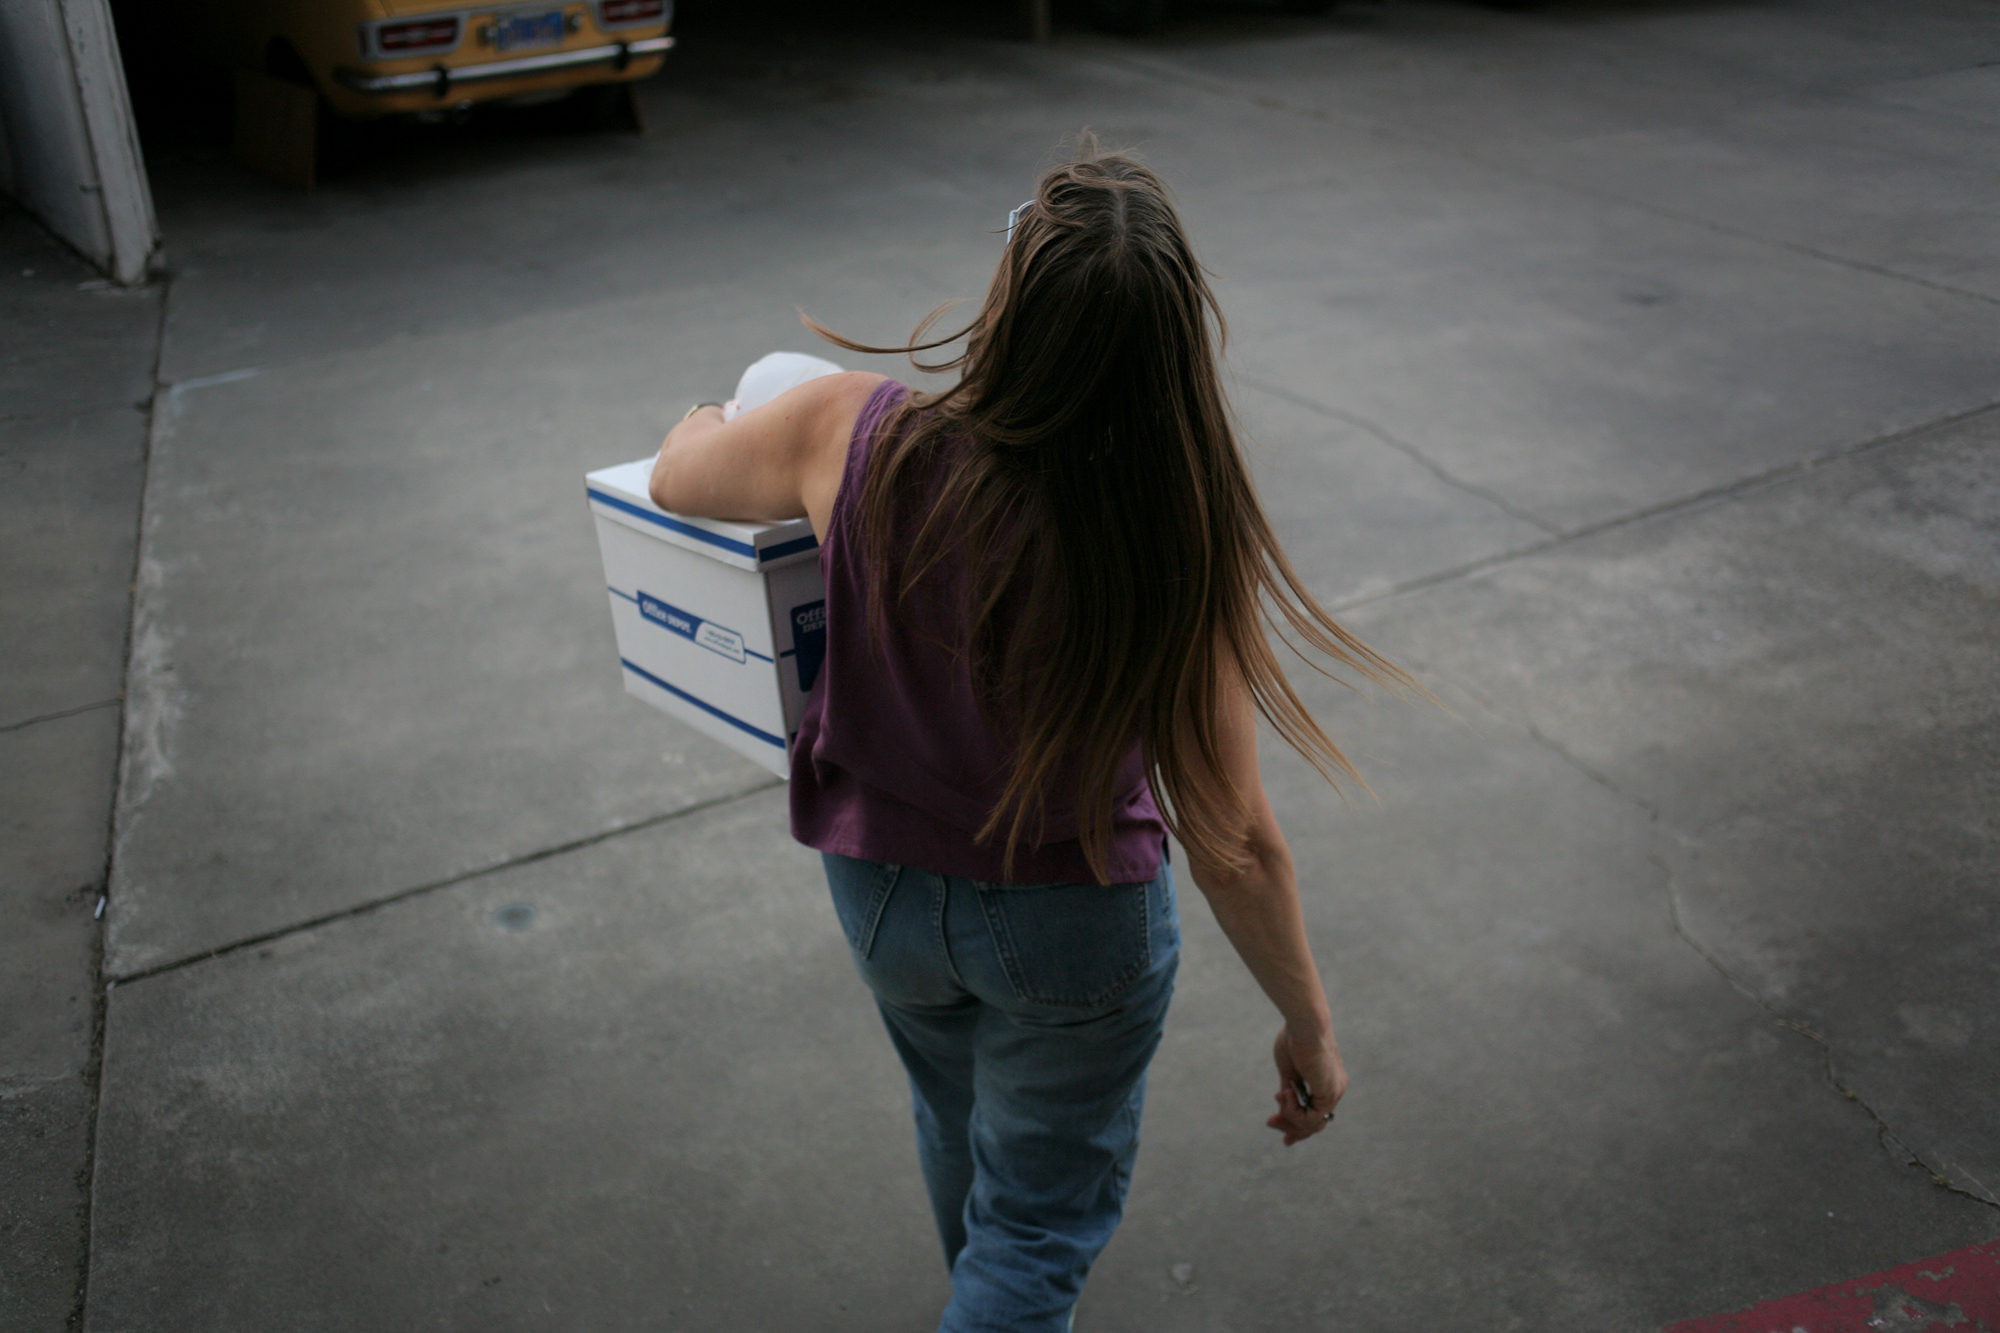  Zing takes the last box of her belongings to her car on move-out day. "I had hoped I would be good enough, loving enough, to keep this relationship going by myself," she said. "But I wasn't."  Zing remains nearby, living with friends until she sorts